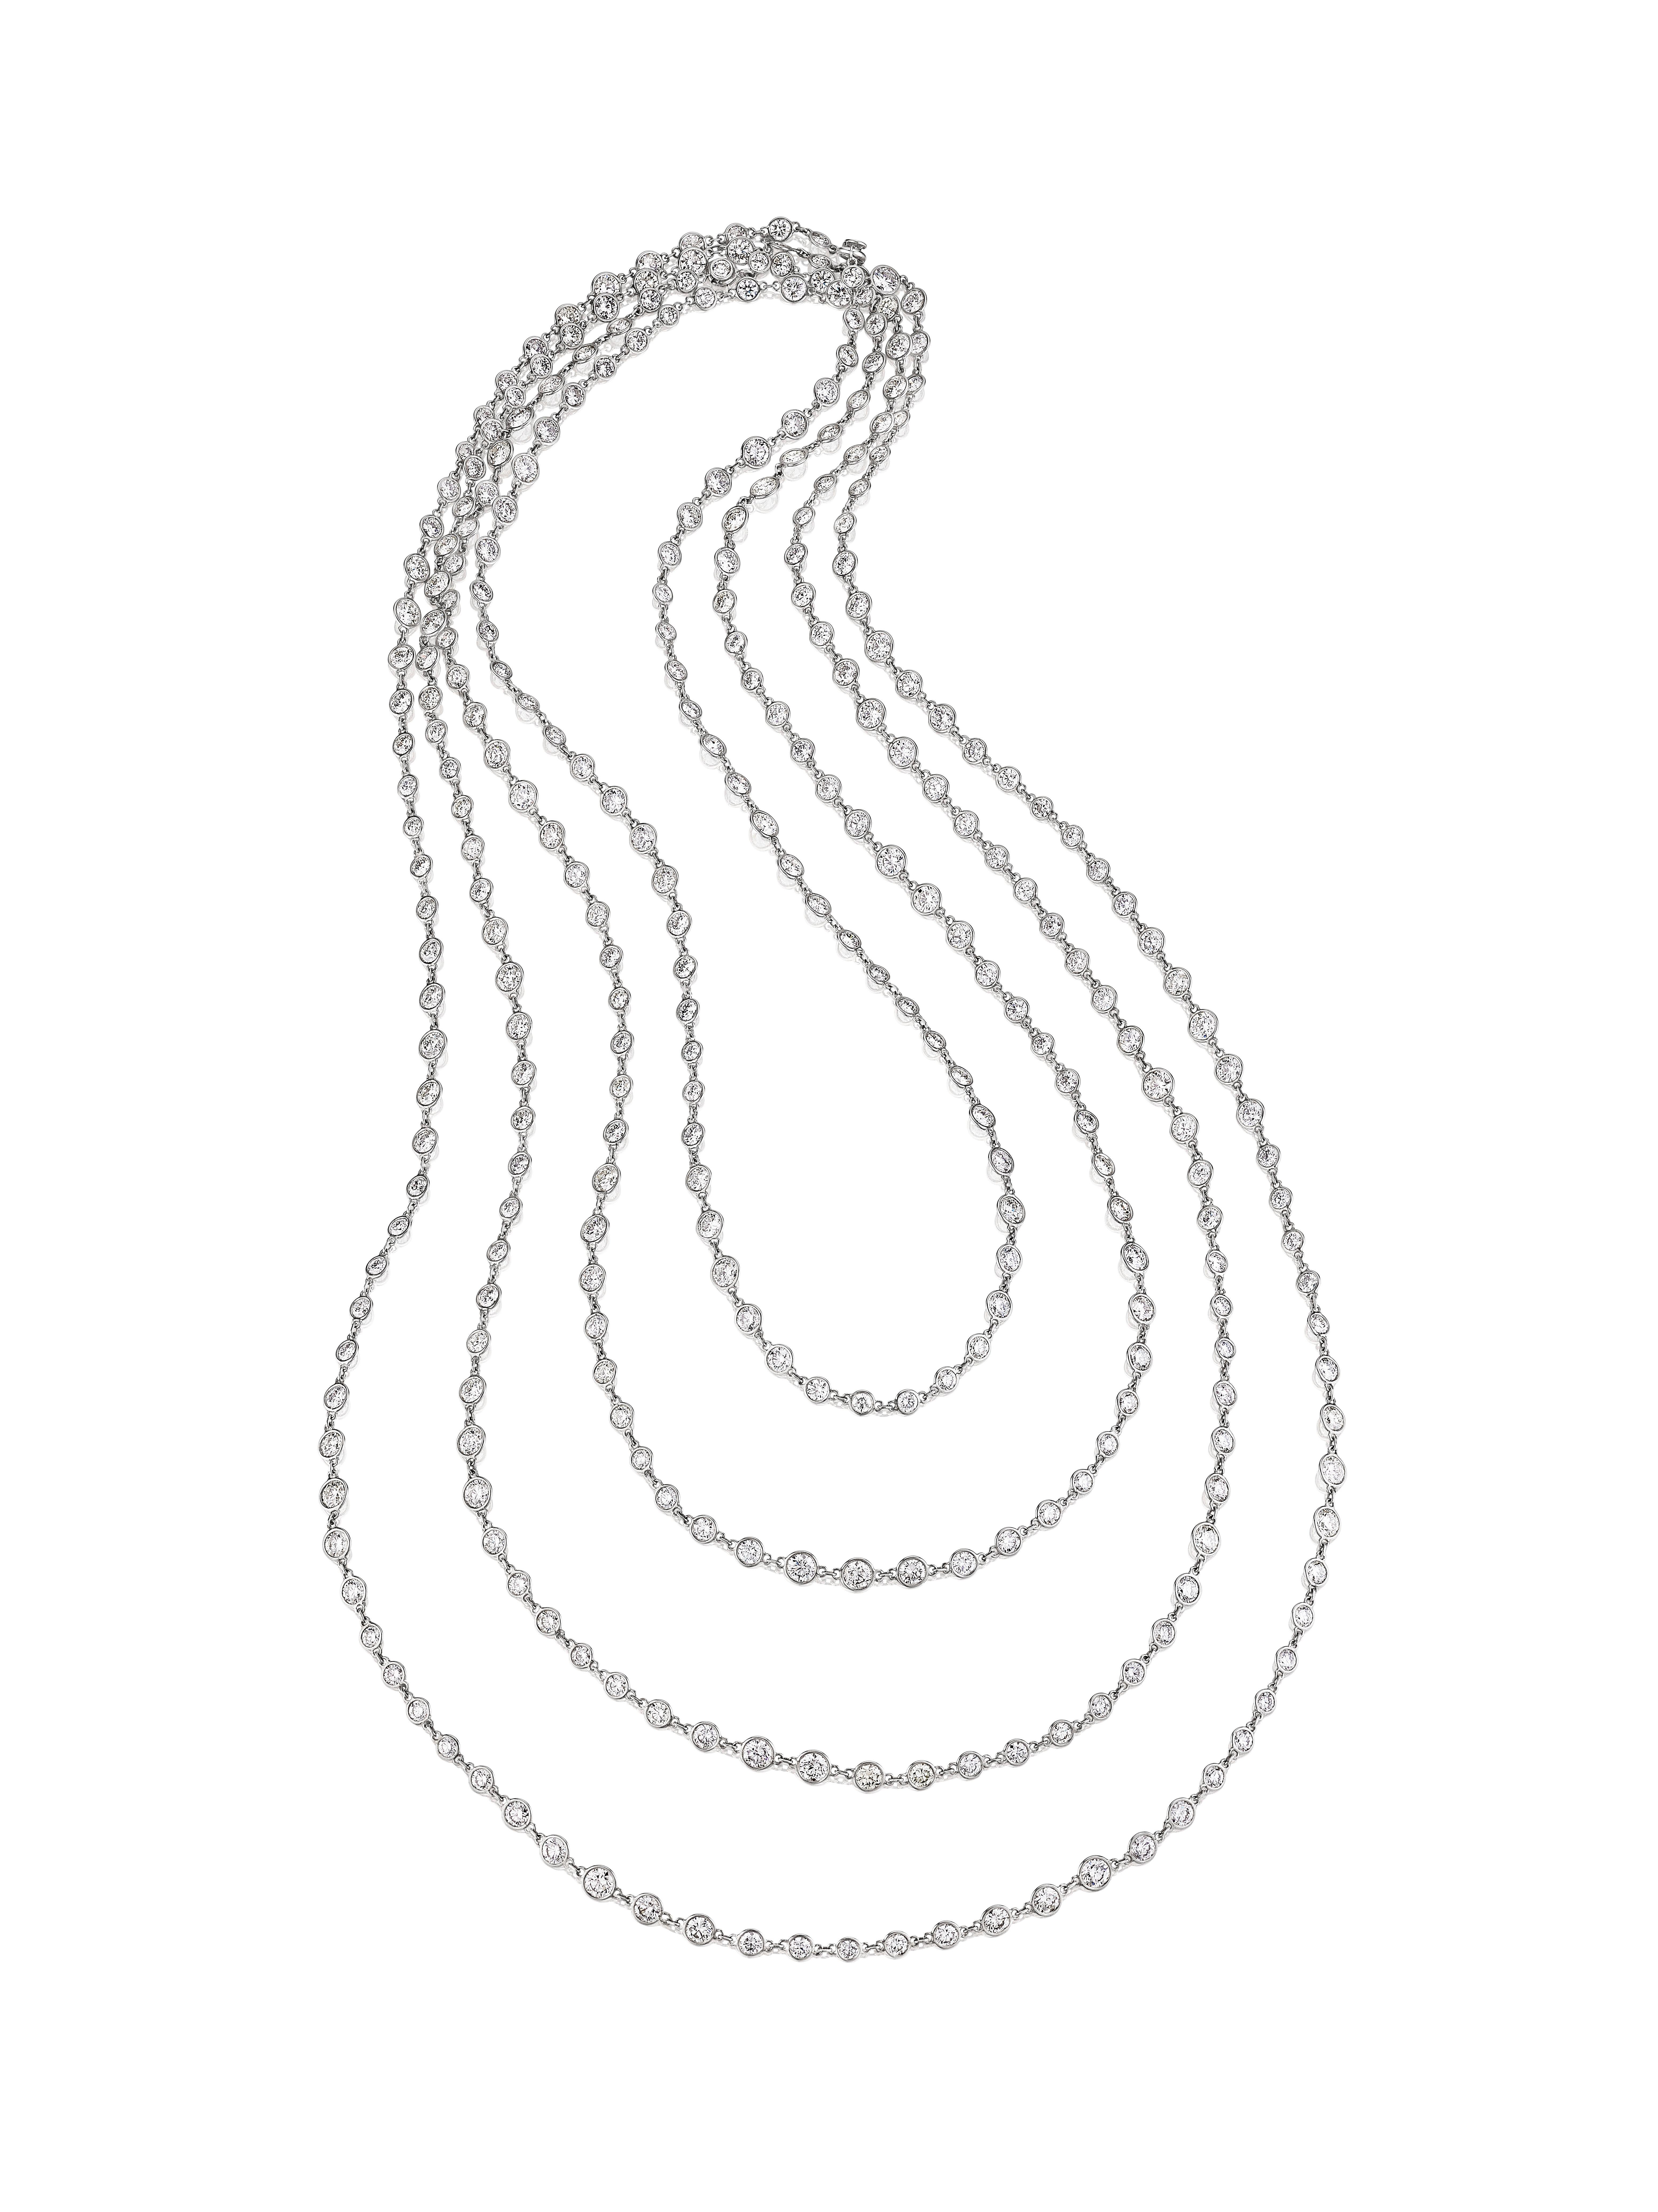 Platinum Diamond Chain Necklace by Siegelson, New York

• A necklace of classic design in the Art Deco style, a flexible long chain composed of collet-set circular-cut diamonds connected by circular platinum links; mounted in platinum
• Circular-cut